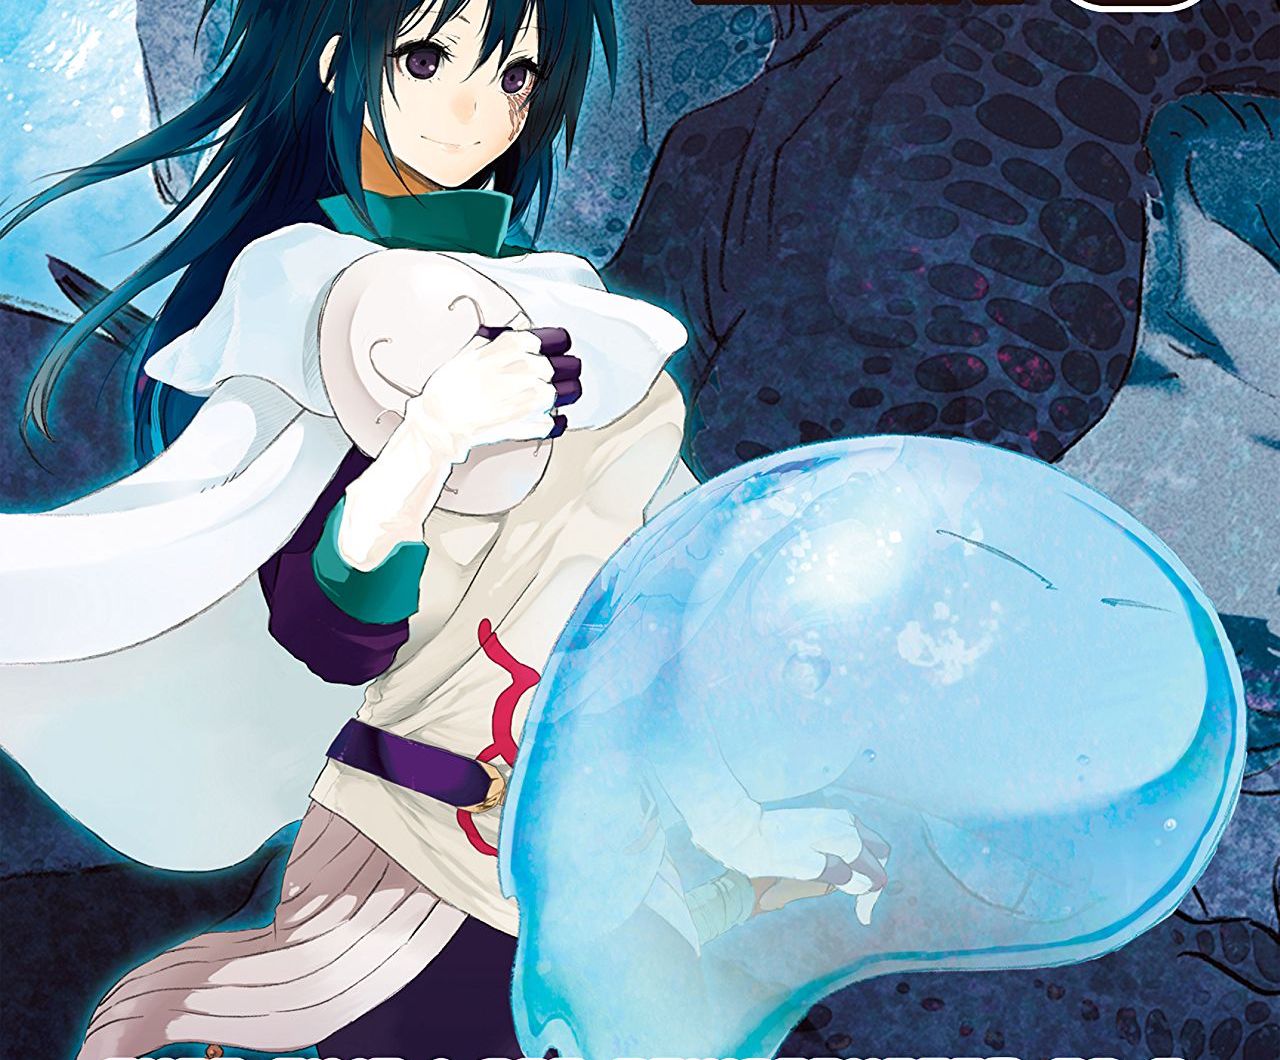 That Time I Got Reincarnated as a Slime Vol. 1 review